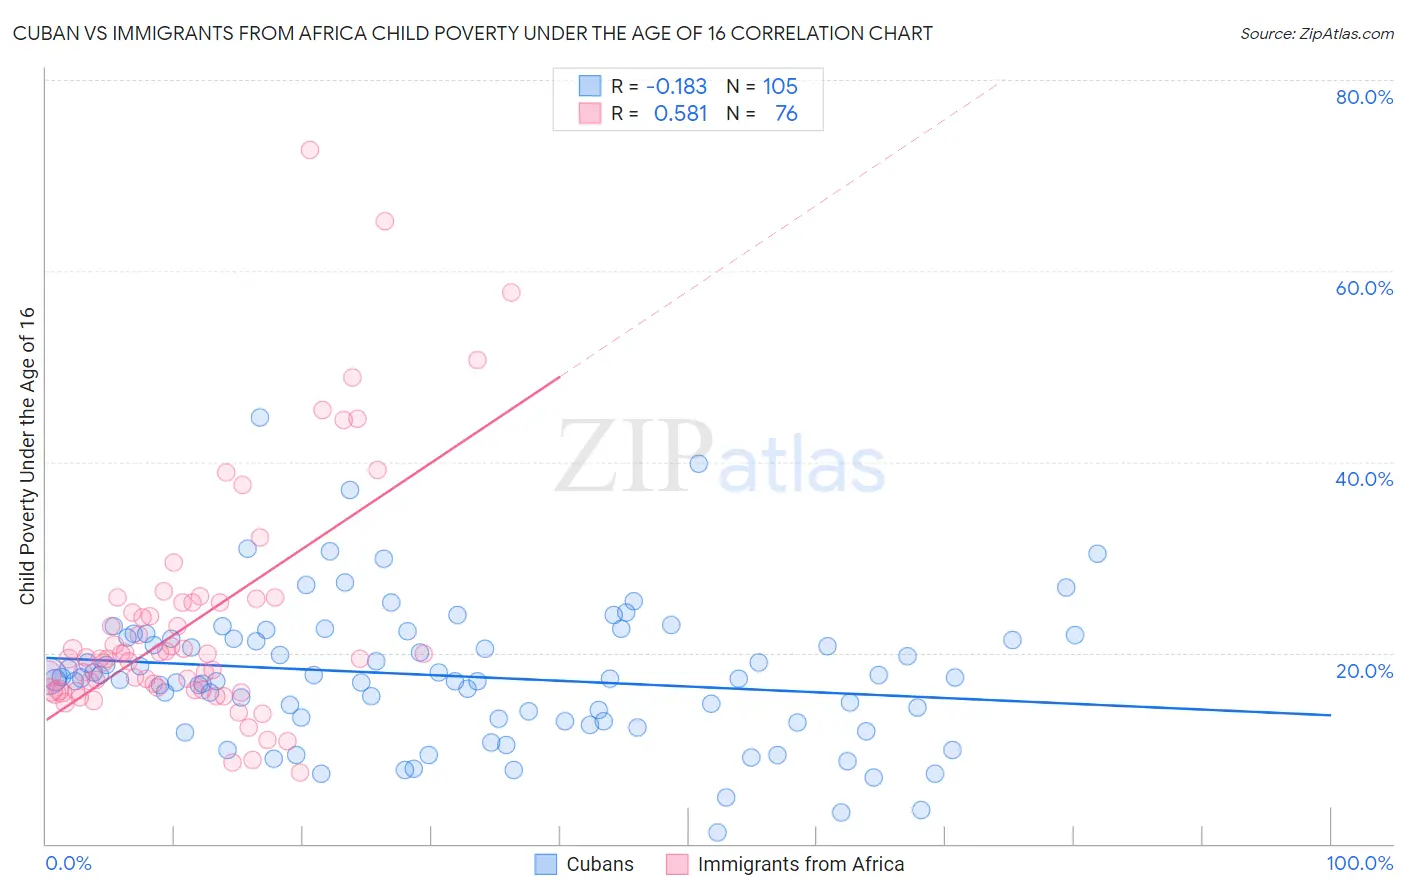 Cuban vs Immigrants from Africa Child Poverty Under the Age of 16